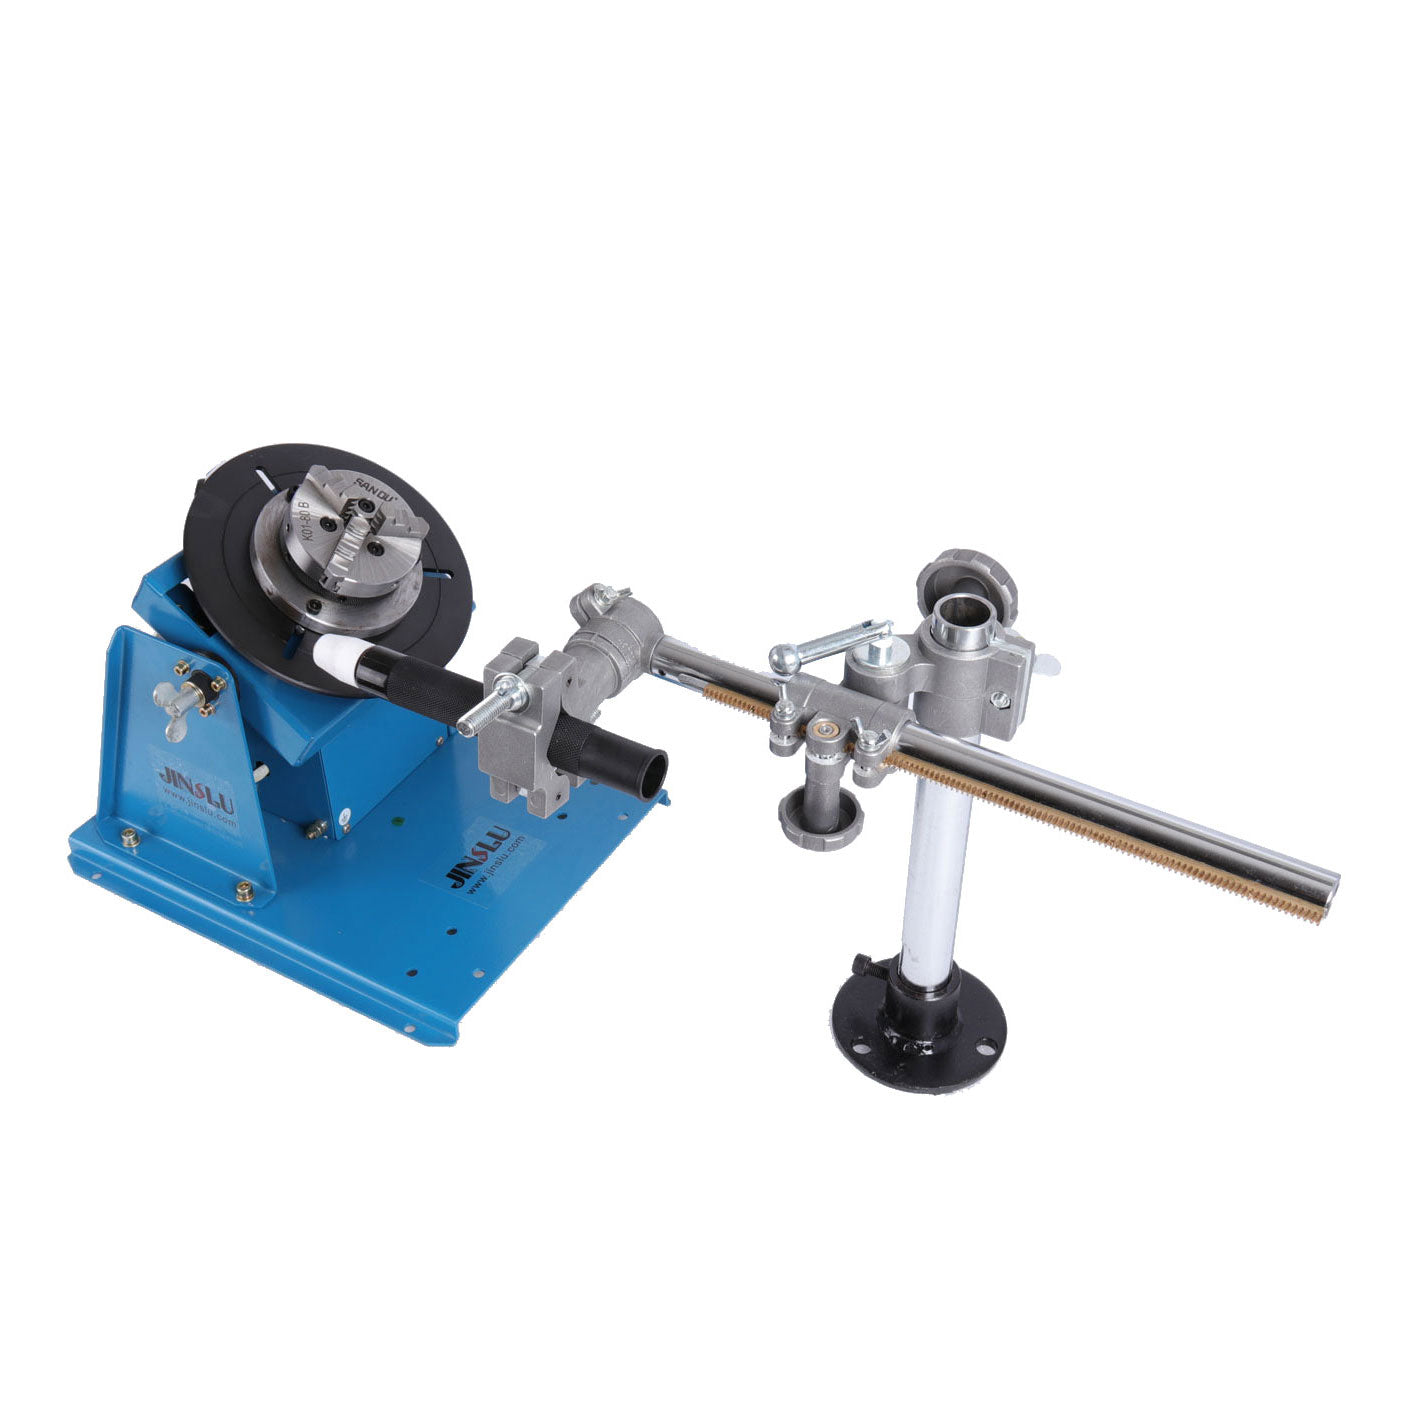 Welding Positioner Turntable Torch Holder 36x33cm with Support Clamp Mountings